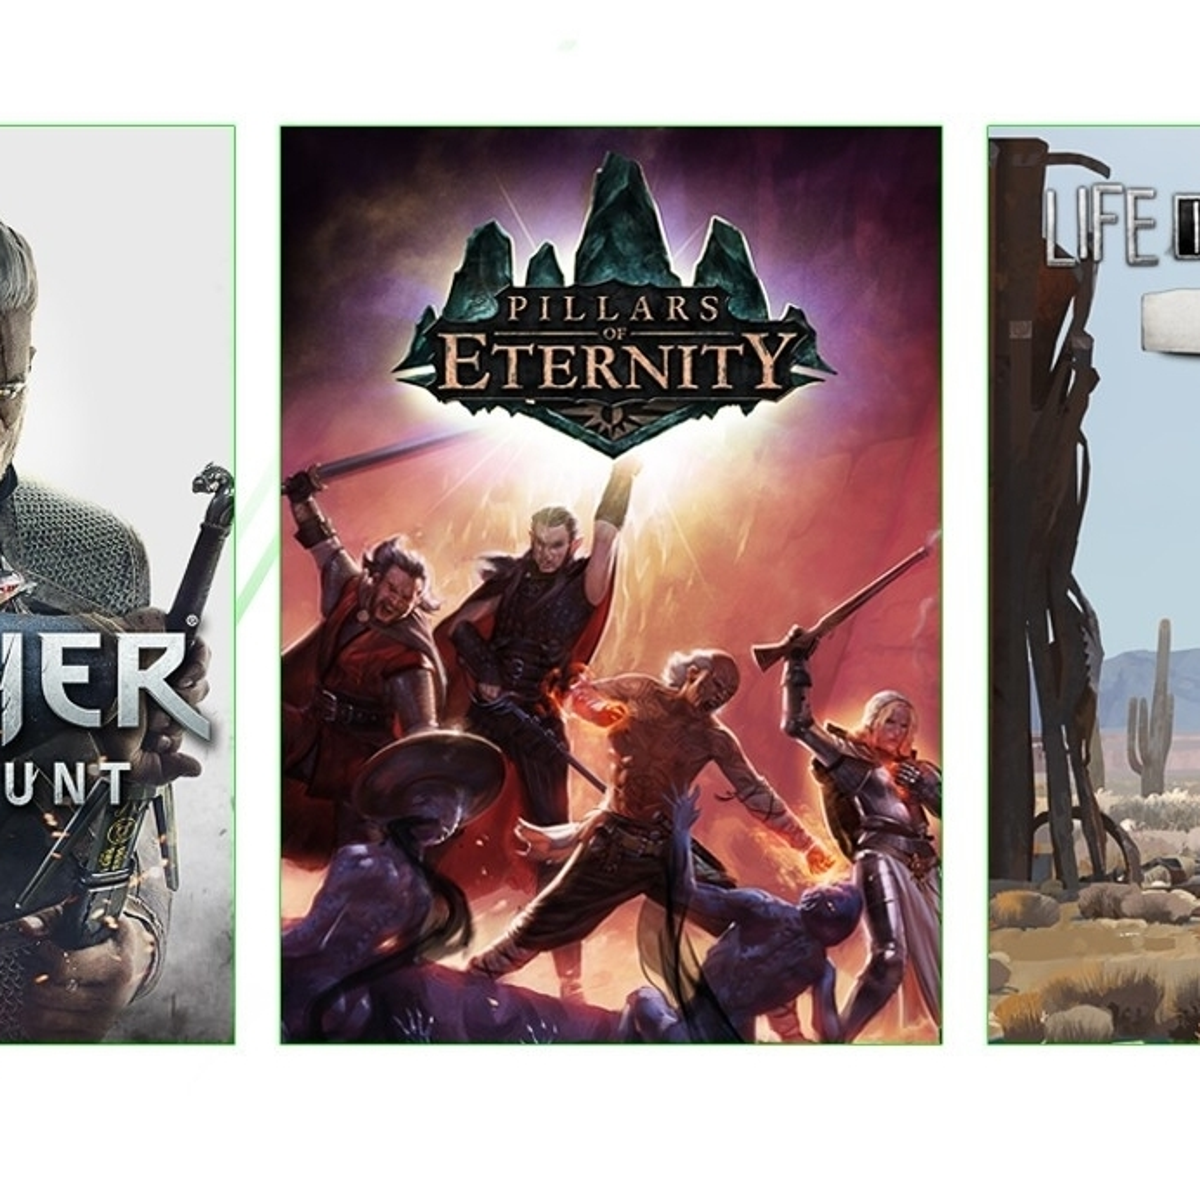 Permanent een schuldeiser bende The Witcher 3, Pillars of Eternity coming to Xbox One Game Pass this week |  Eurogamer.net